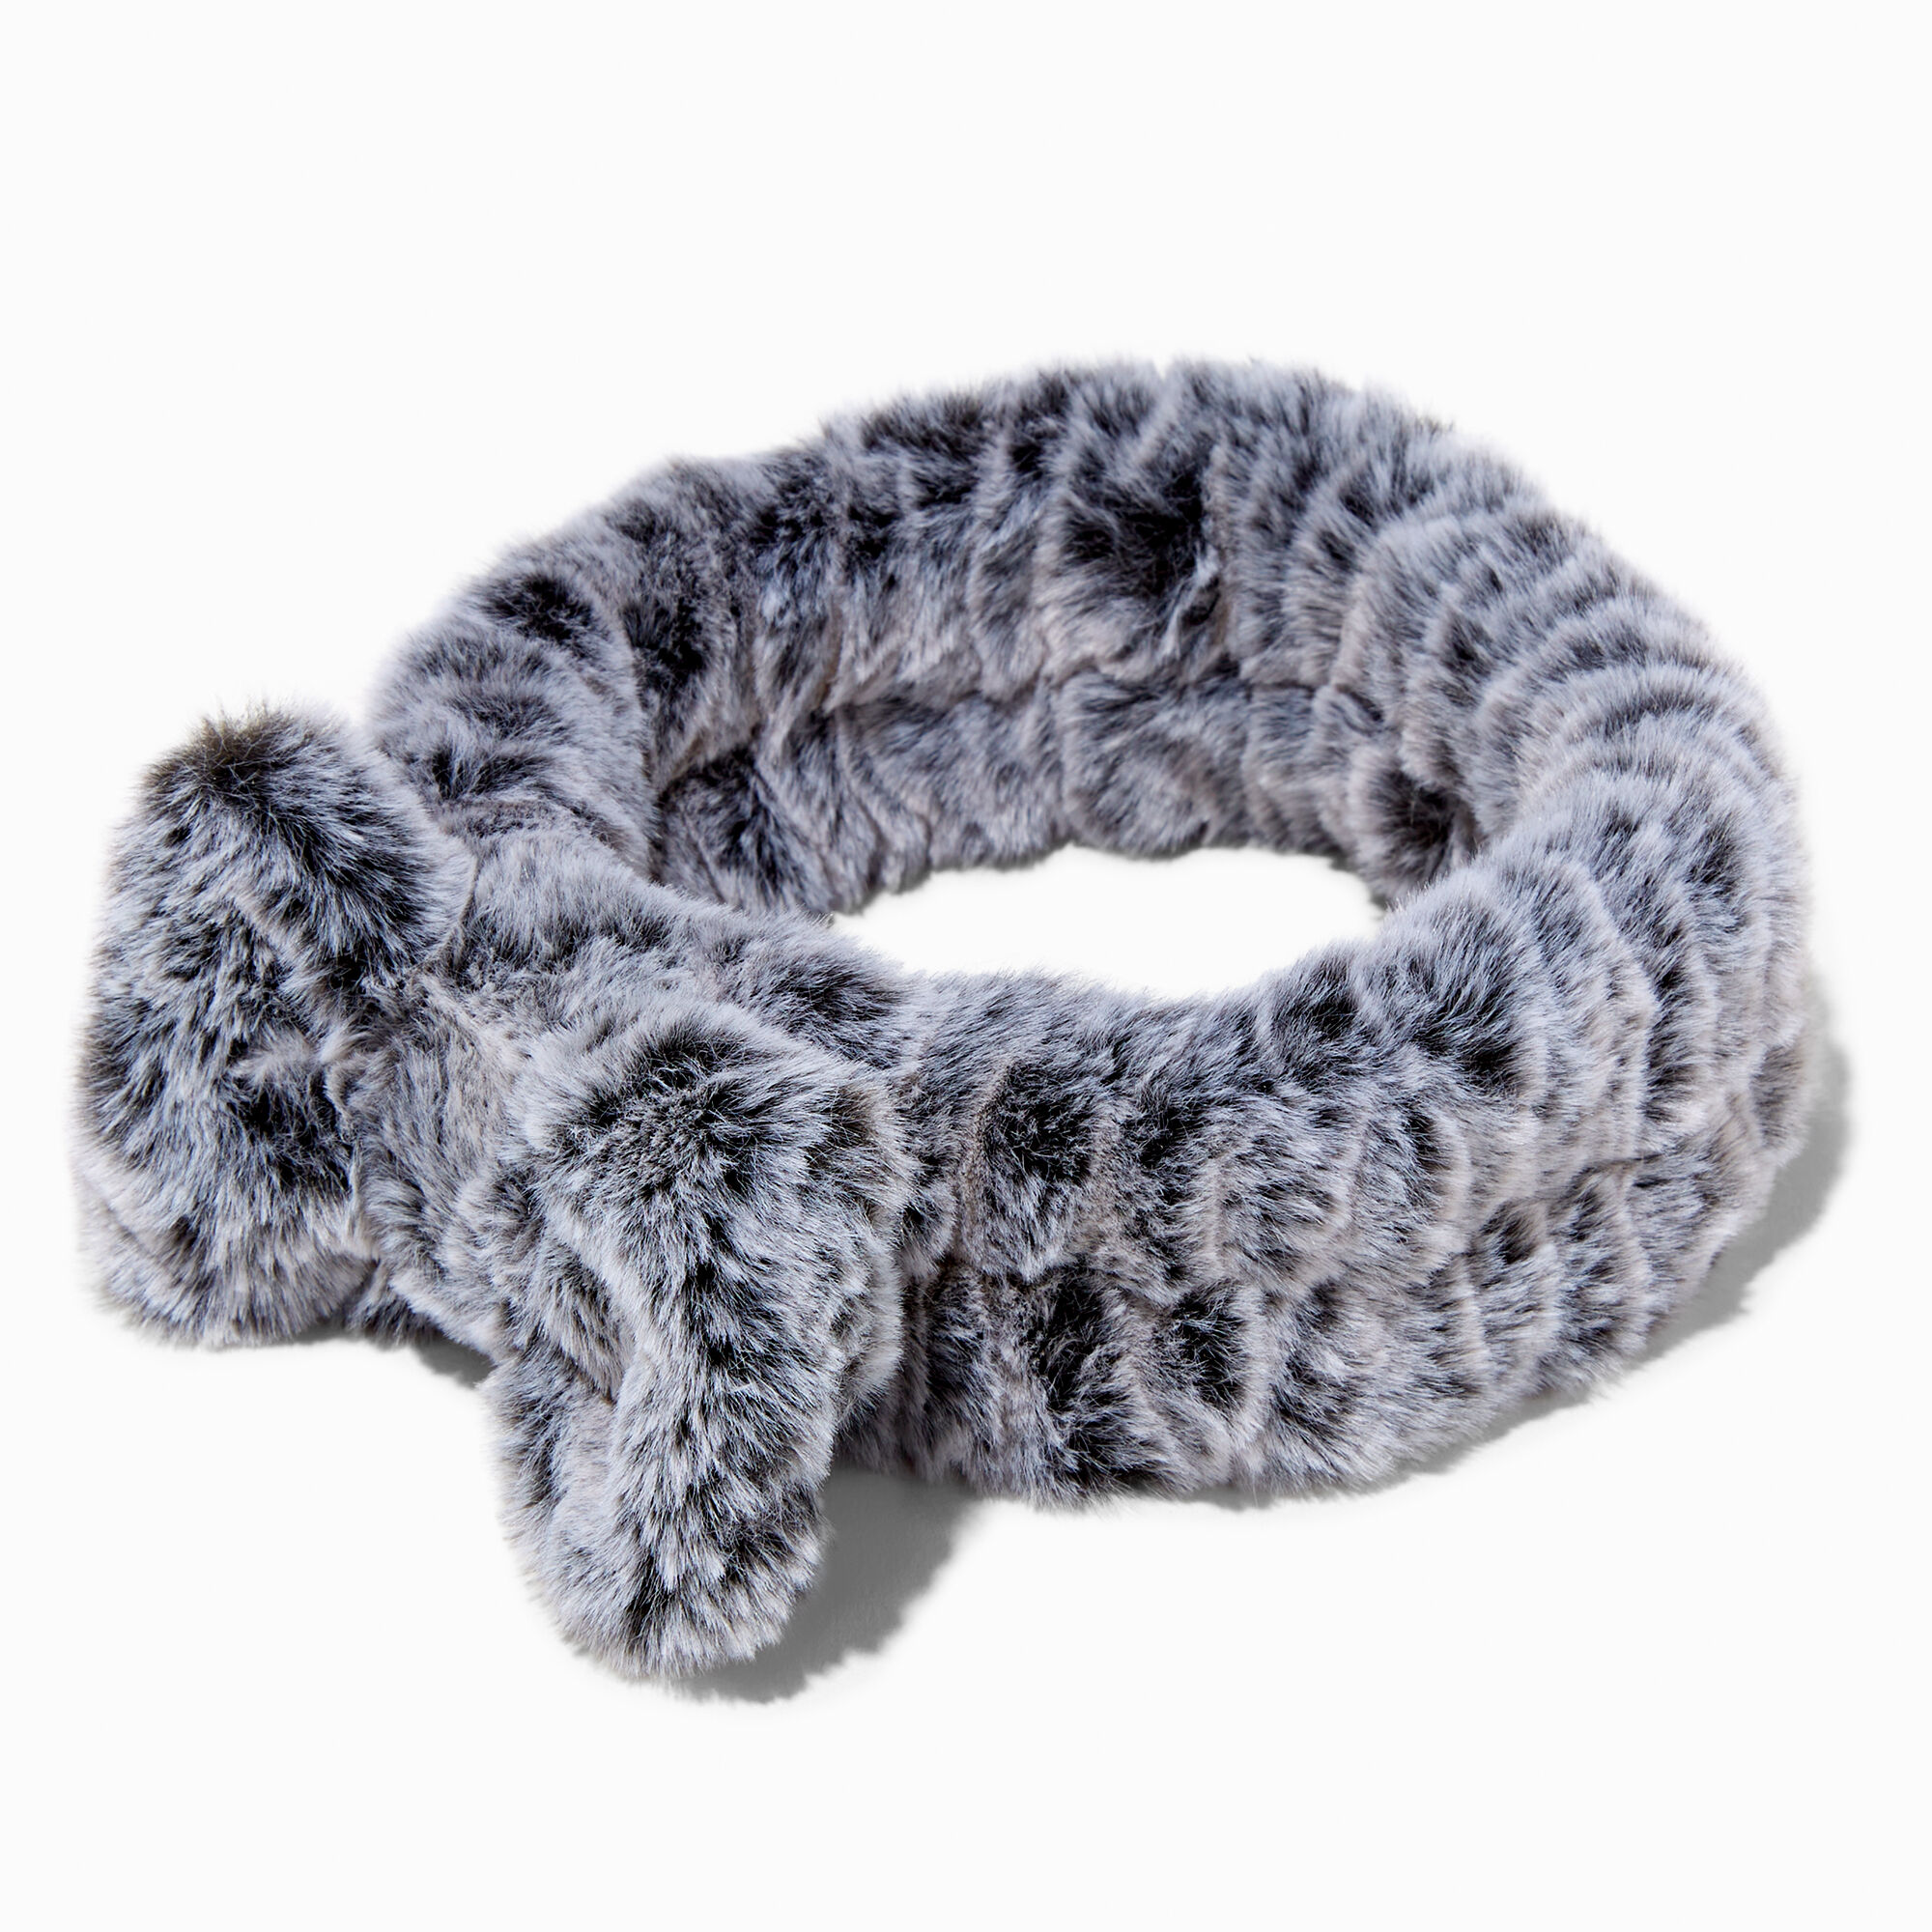 View Claires Furry Makeup Bow Headwrap Grey information